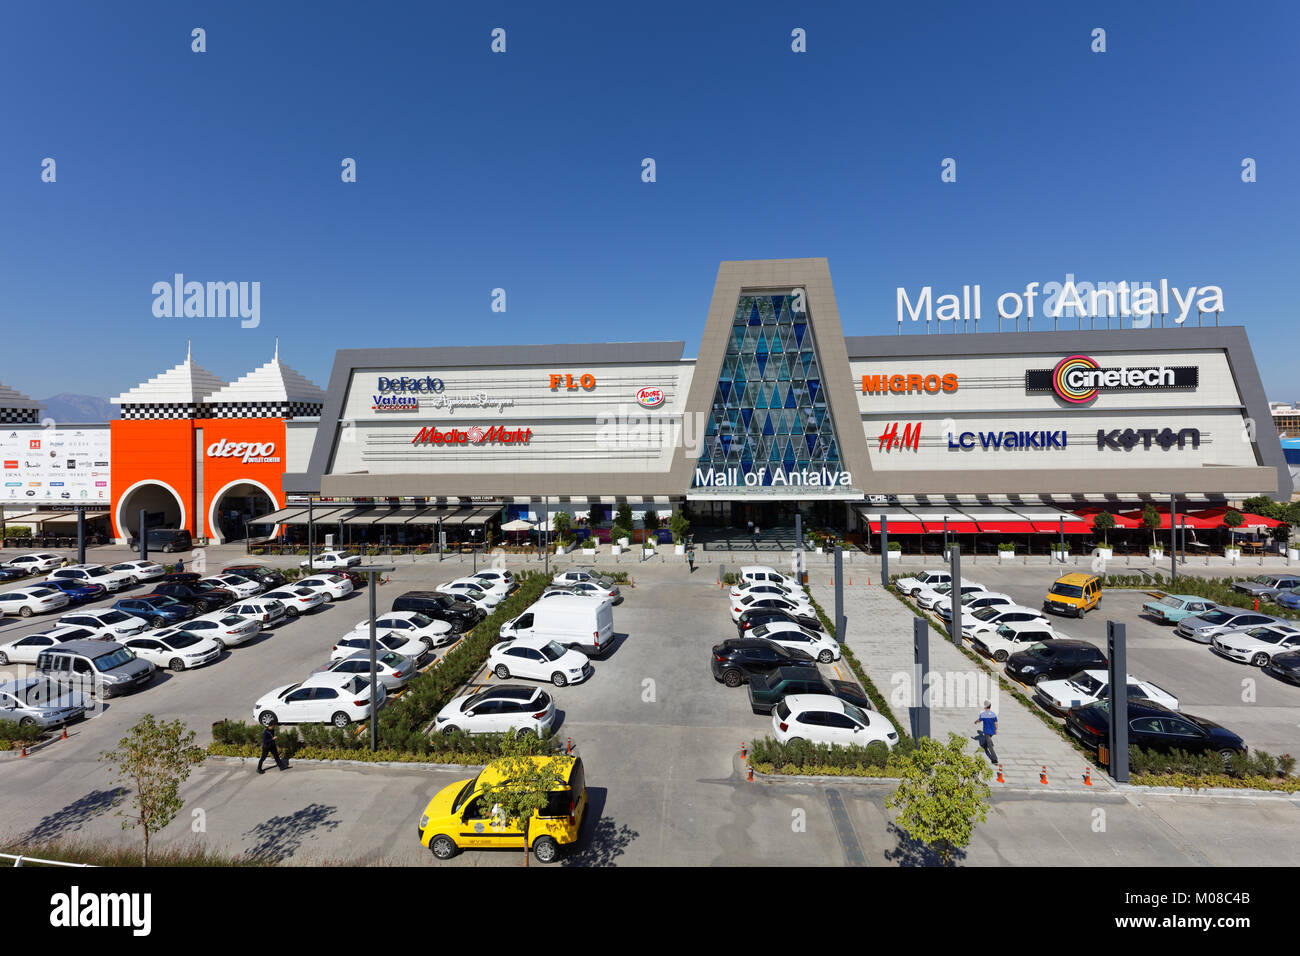 Mall Of Antalya High Resolution Stock Photography and Images - Alamy